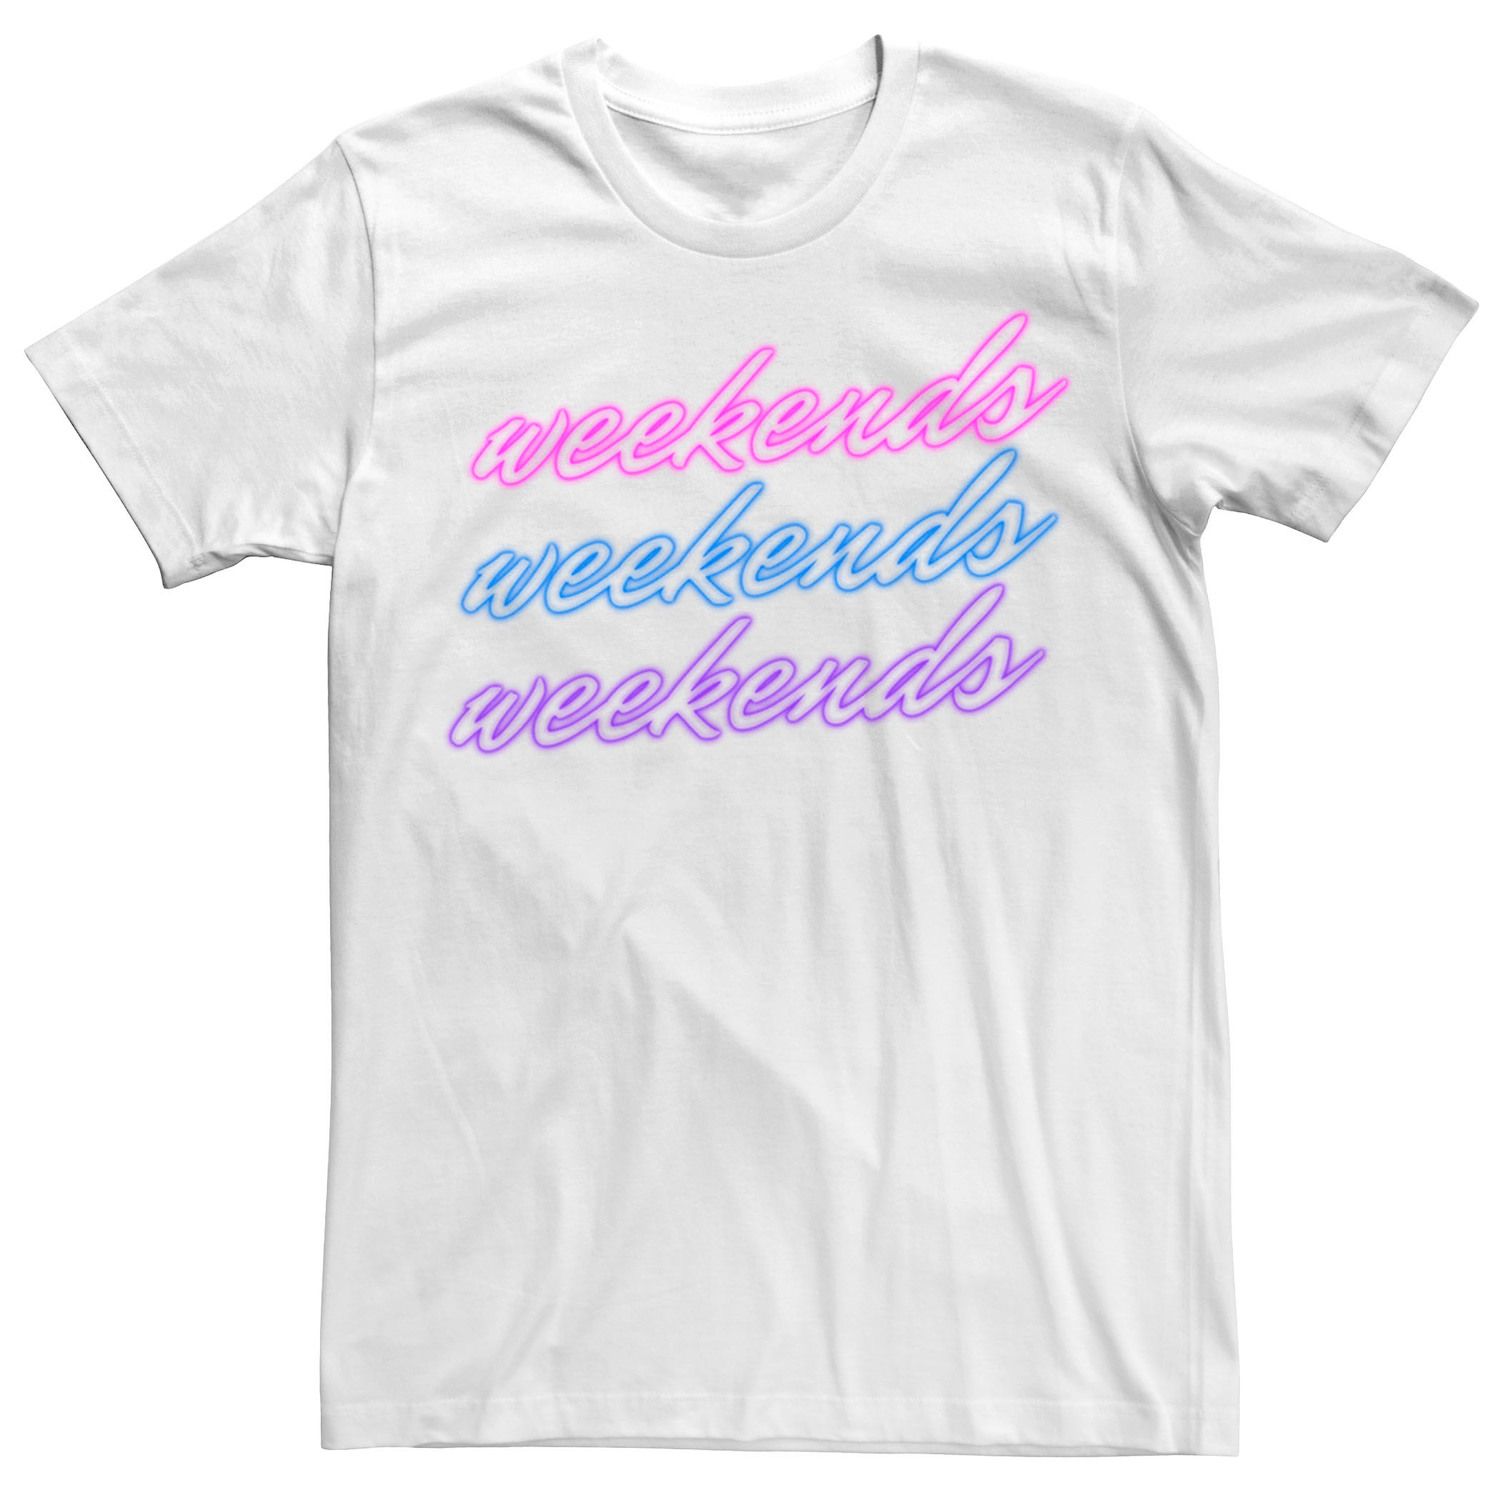 Image for Licensed Character Men's Weekends Neon Cursive Tee at Kohl's.